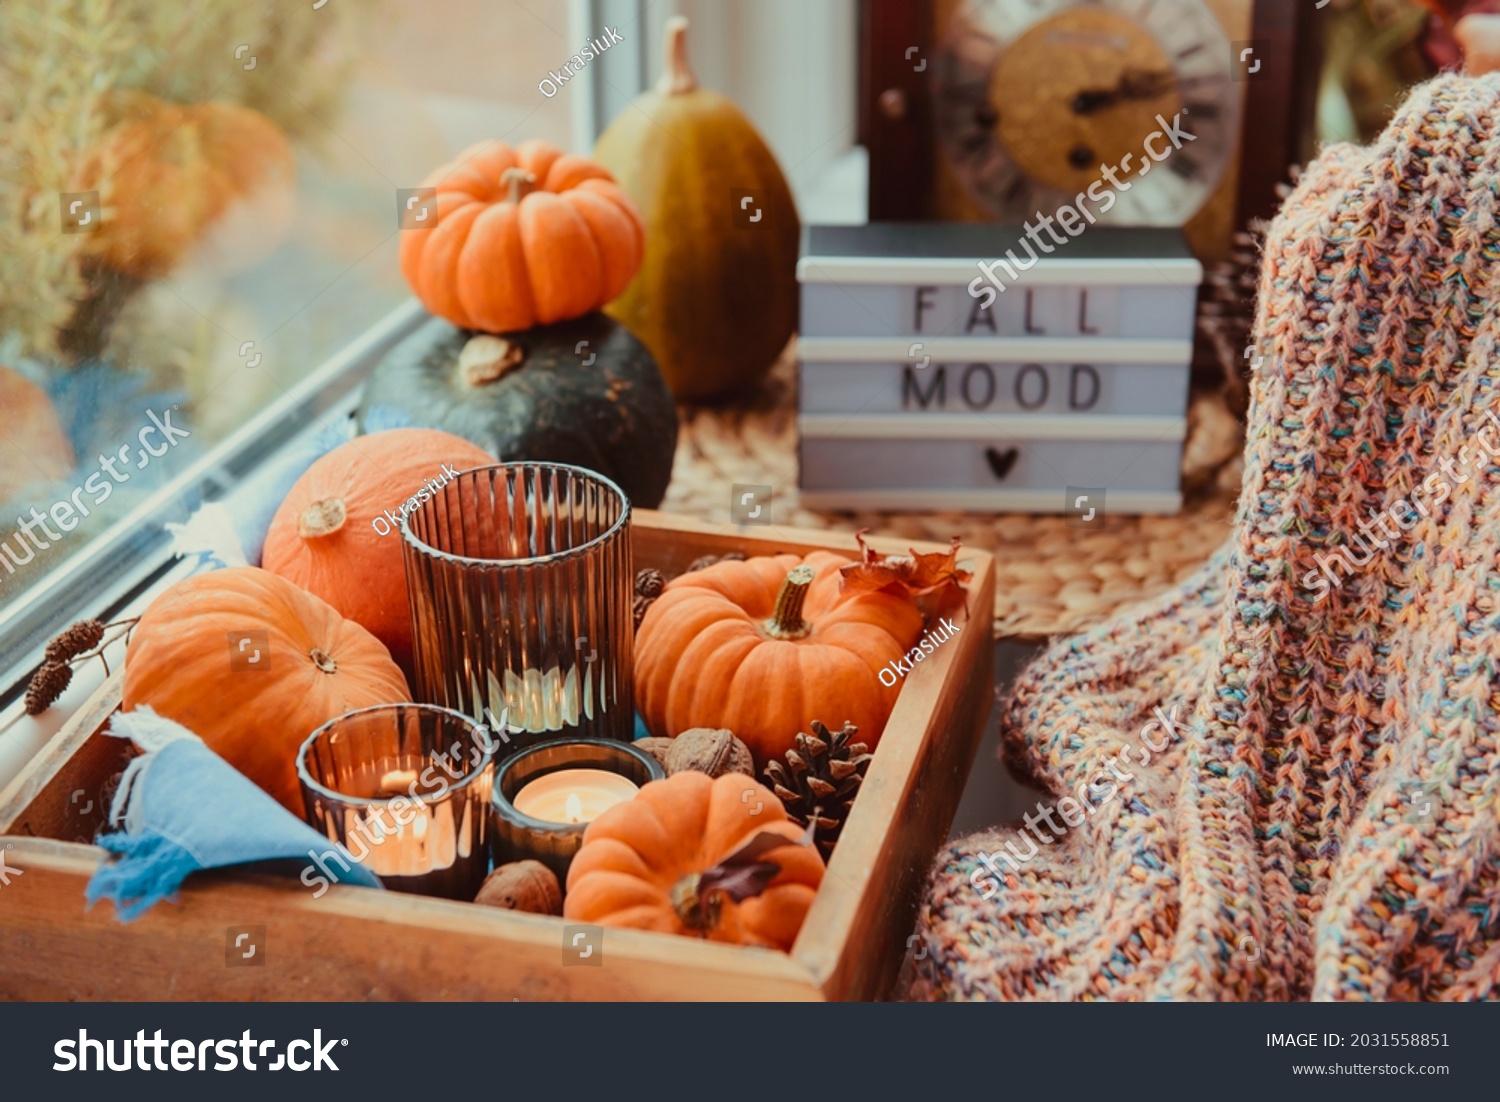 Autumn cozy mood composition on the windowsill. Pumpkins, cones, candles on wooden tray, blurred Fall mood message on lightbox, warm plaid. Autumn, fall, hygge home decor. Selective focus. Copy space. #2031558851